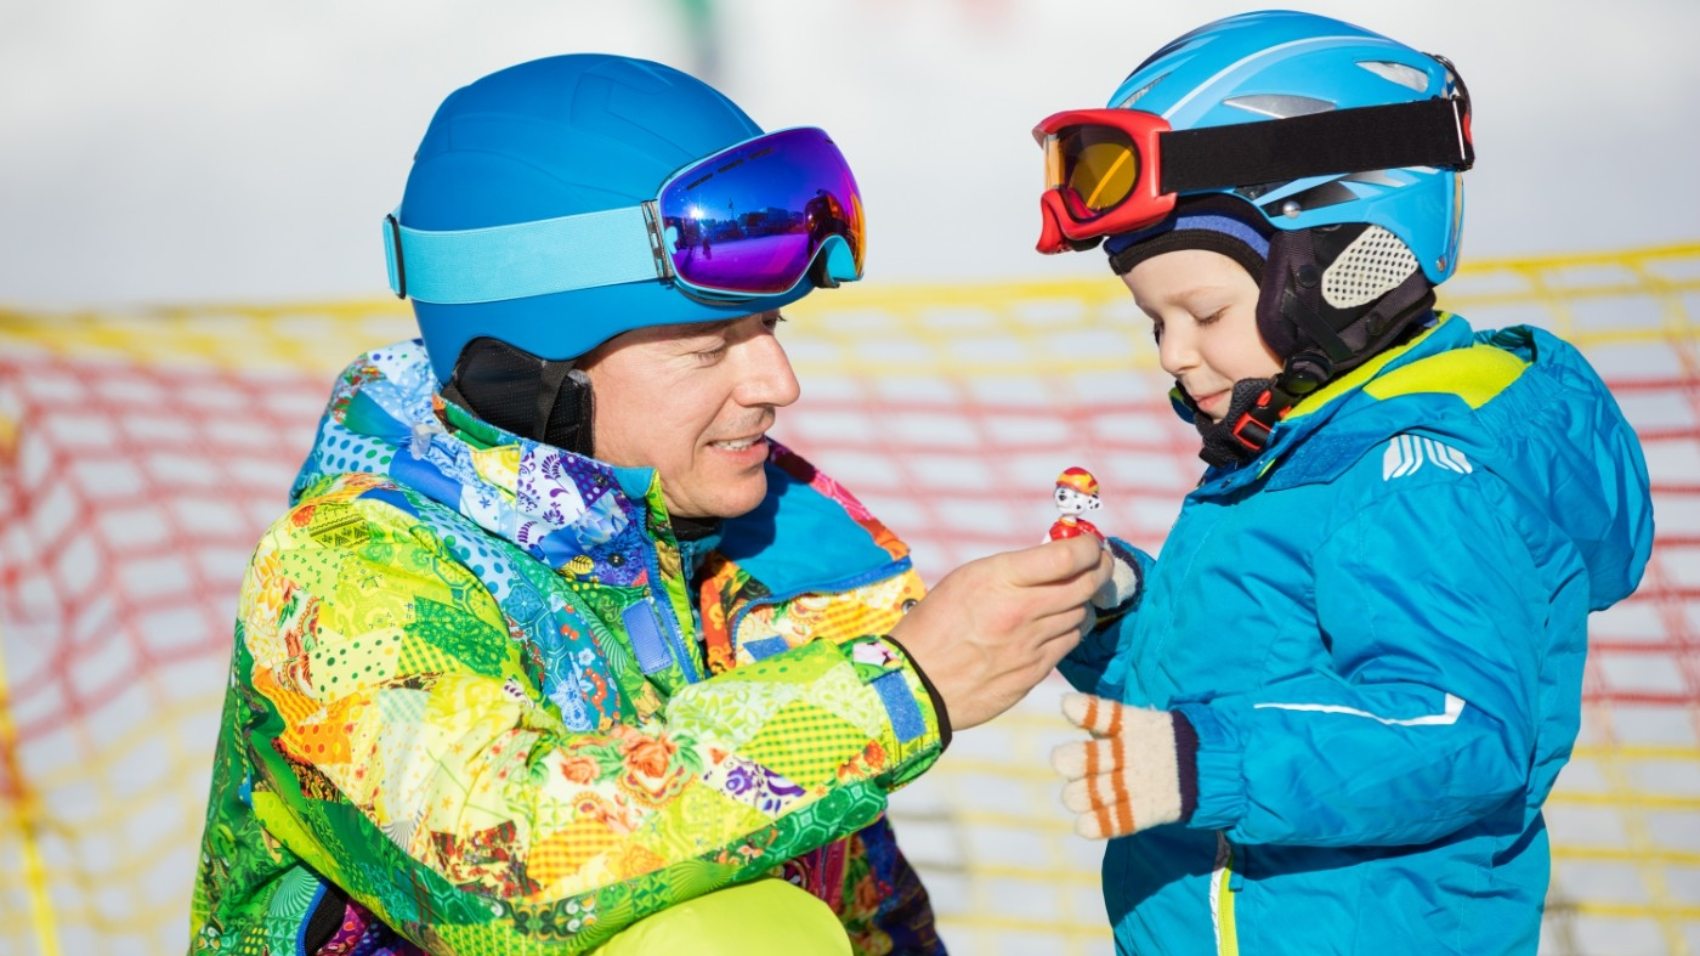 father-and-little-son-in-skiing-outfits-playing-PMSY642